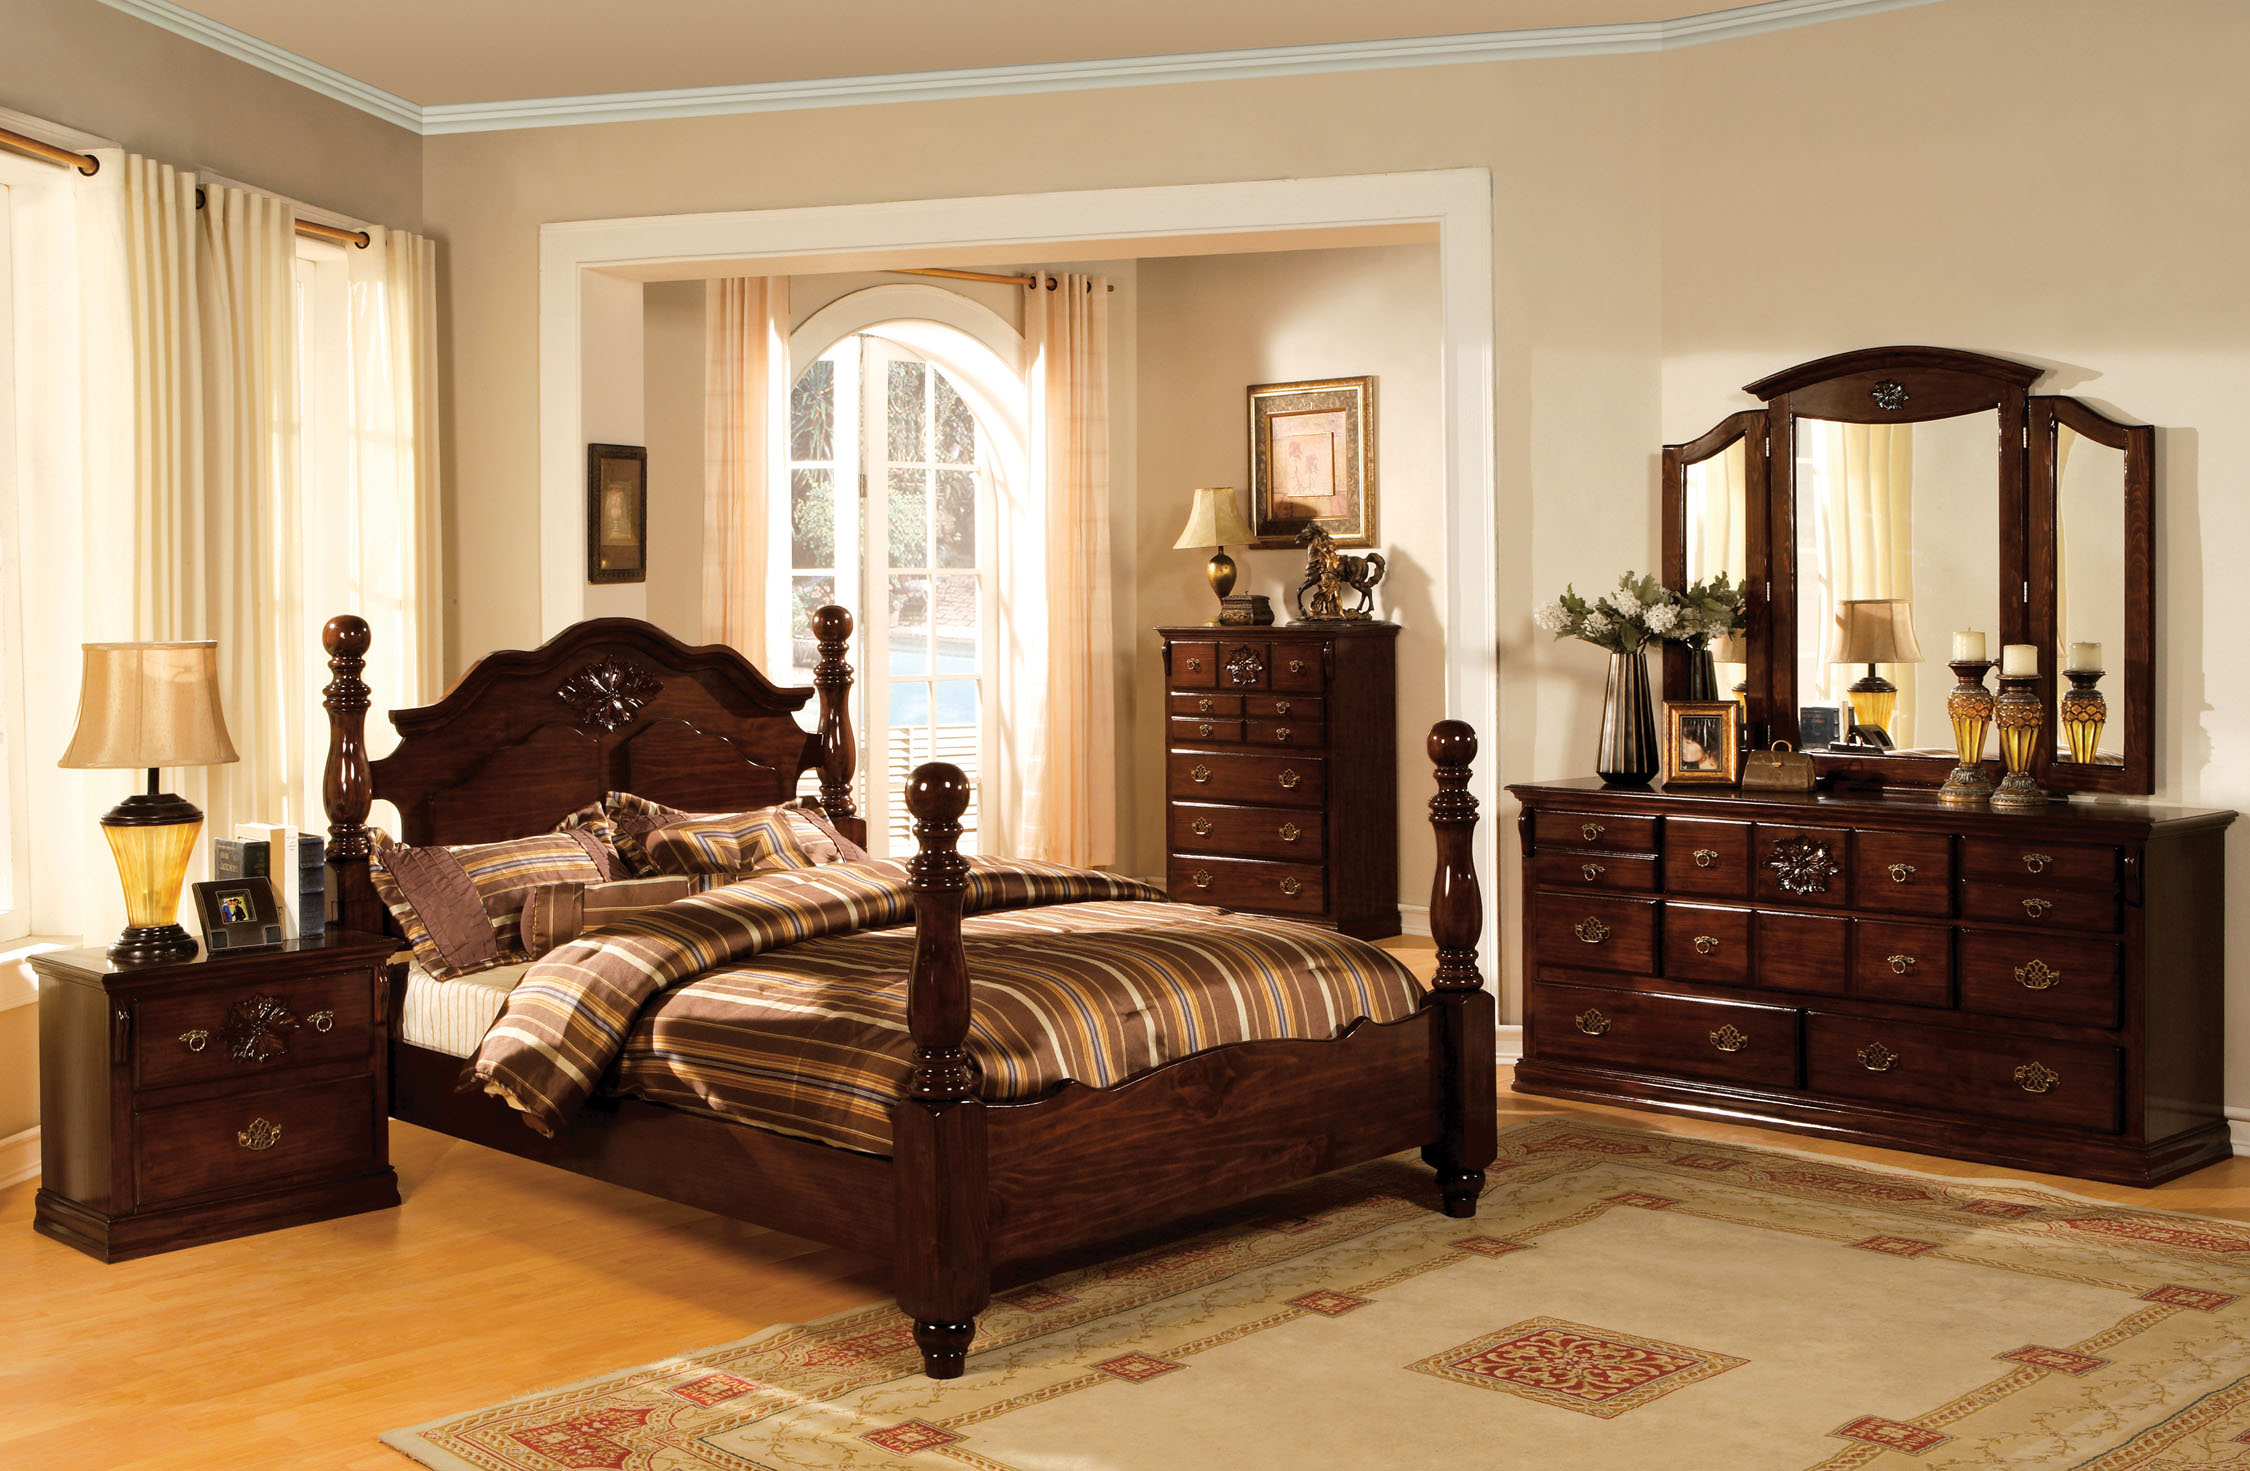 Furniture of America Glossy Dark Pine Four Poster Bed